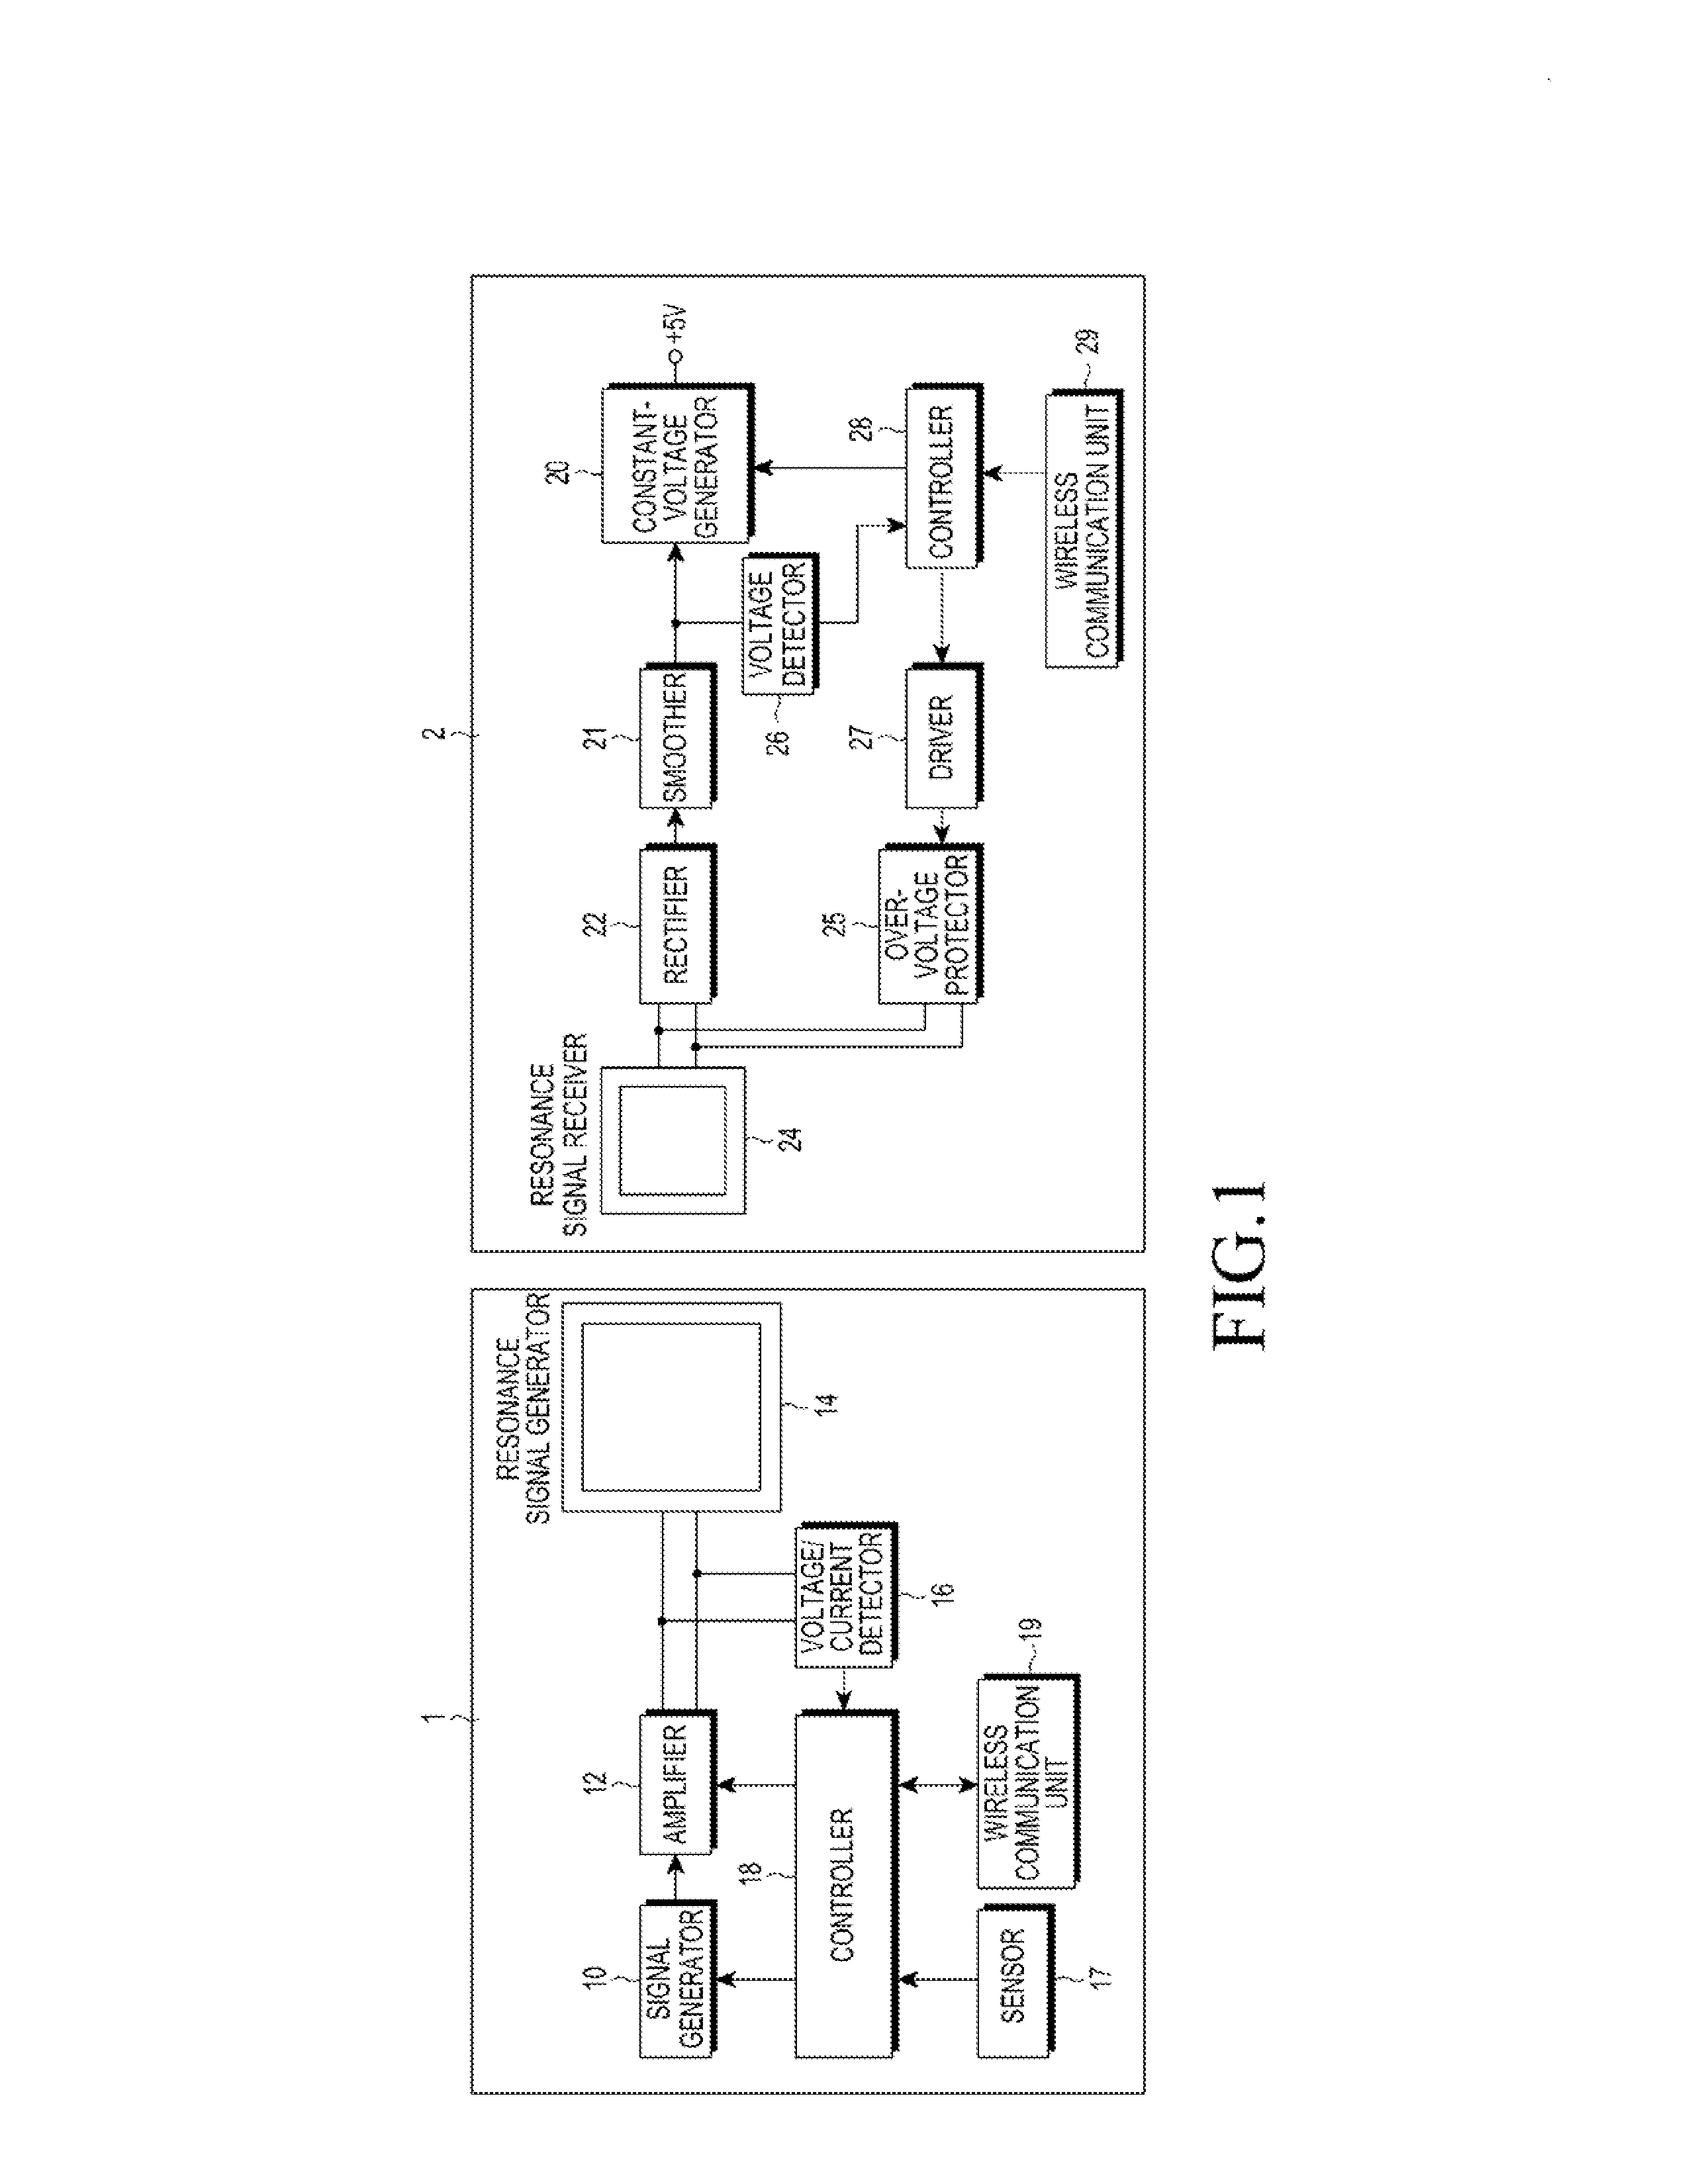 Over-voltage protection device for resonant wireless power reception device and method for controlling the over-voltage protection device